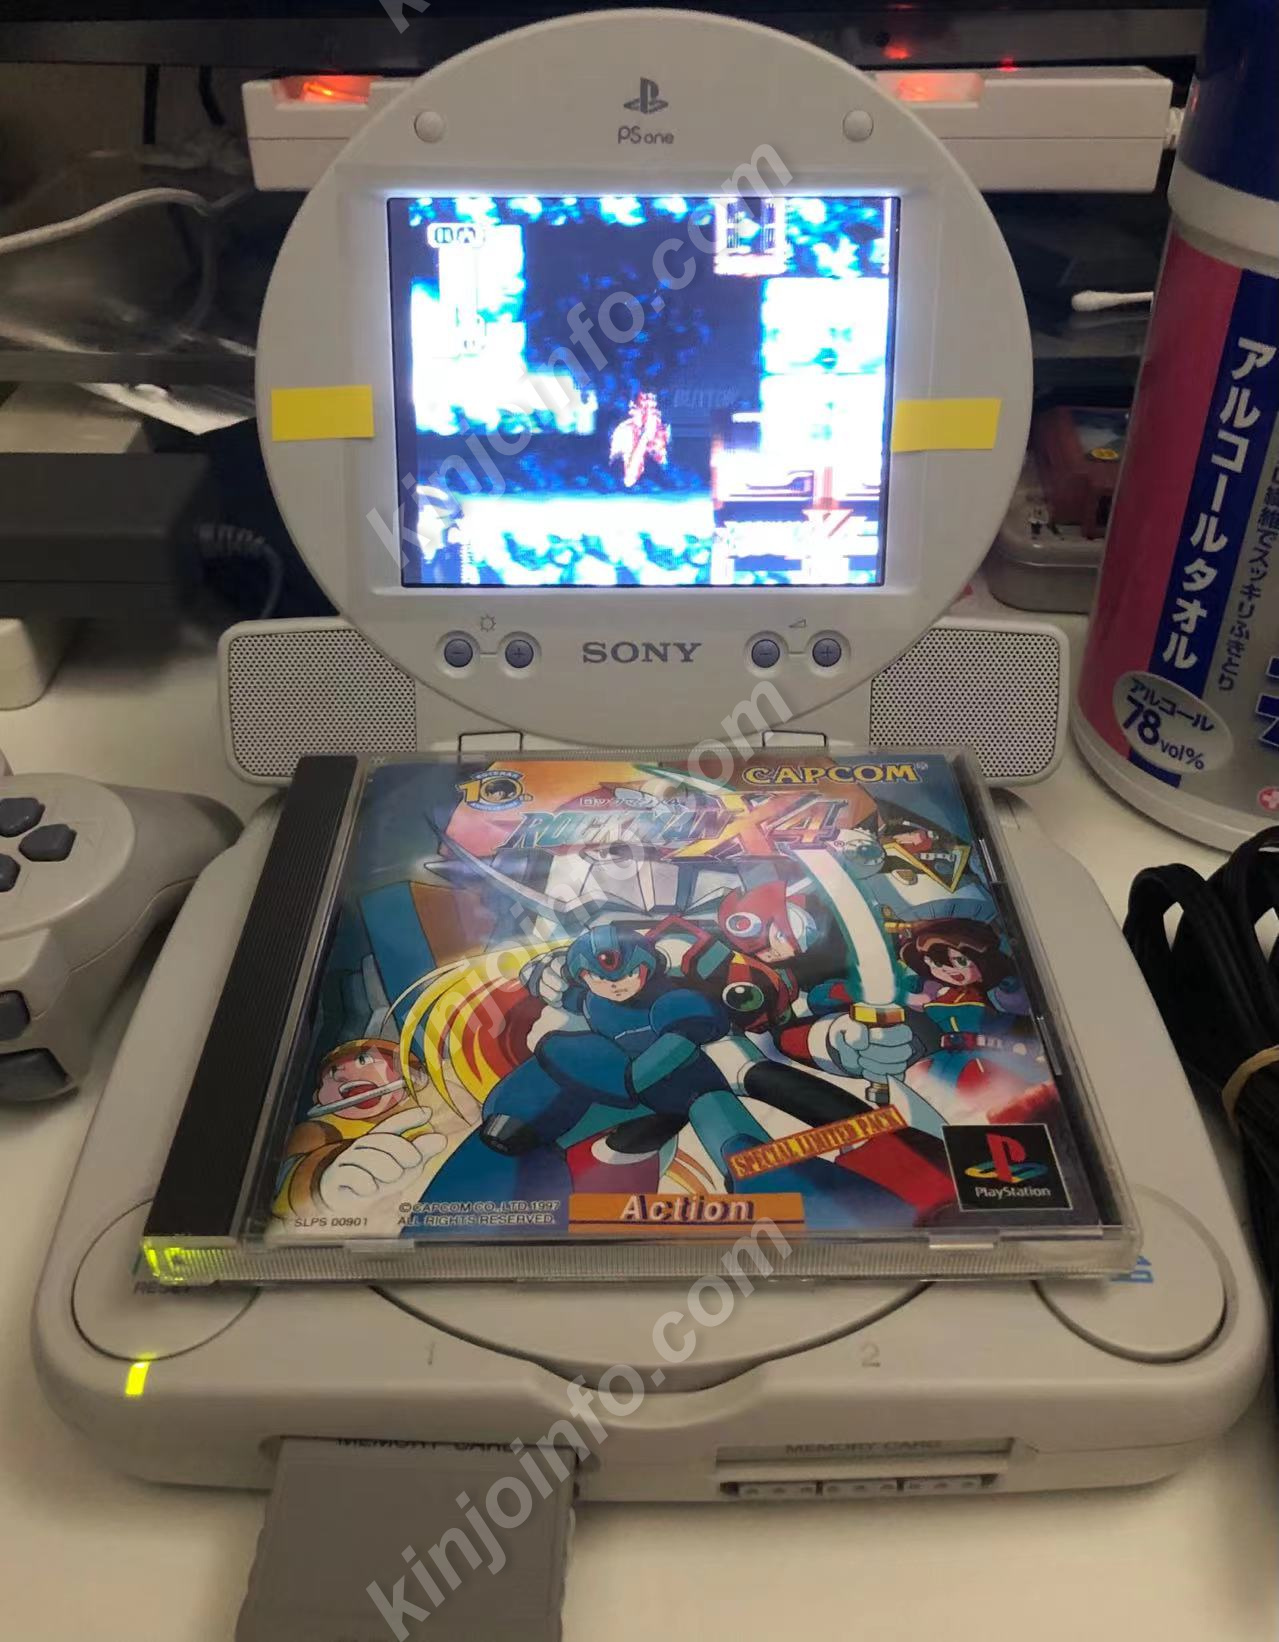 PSone 液晶モニター COMBO PlayStation ＋ソフト - テレビゲーム